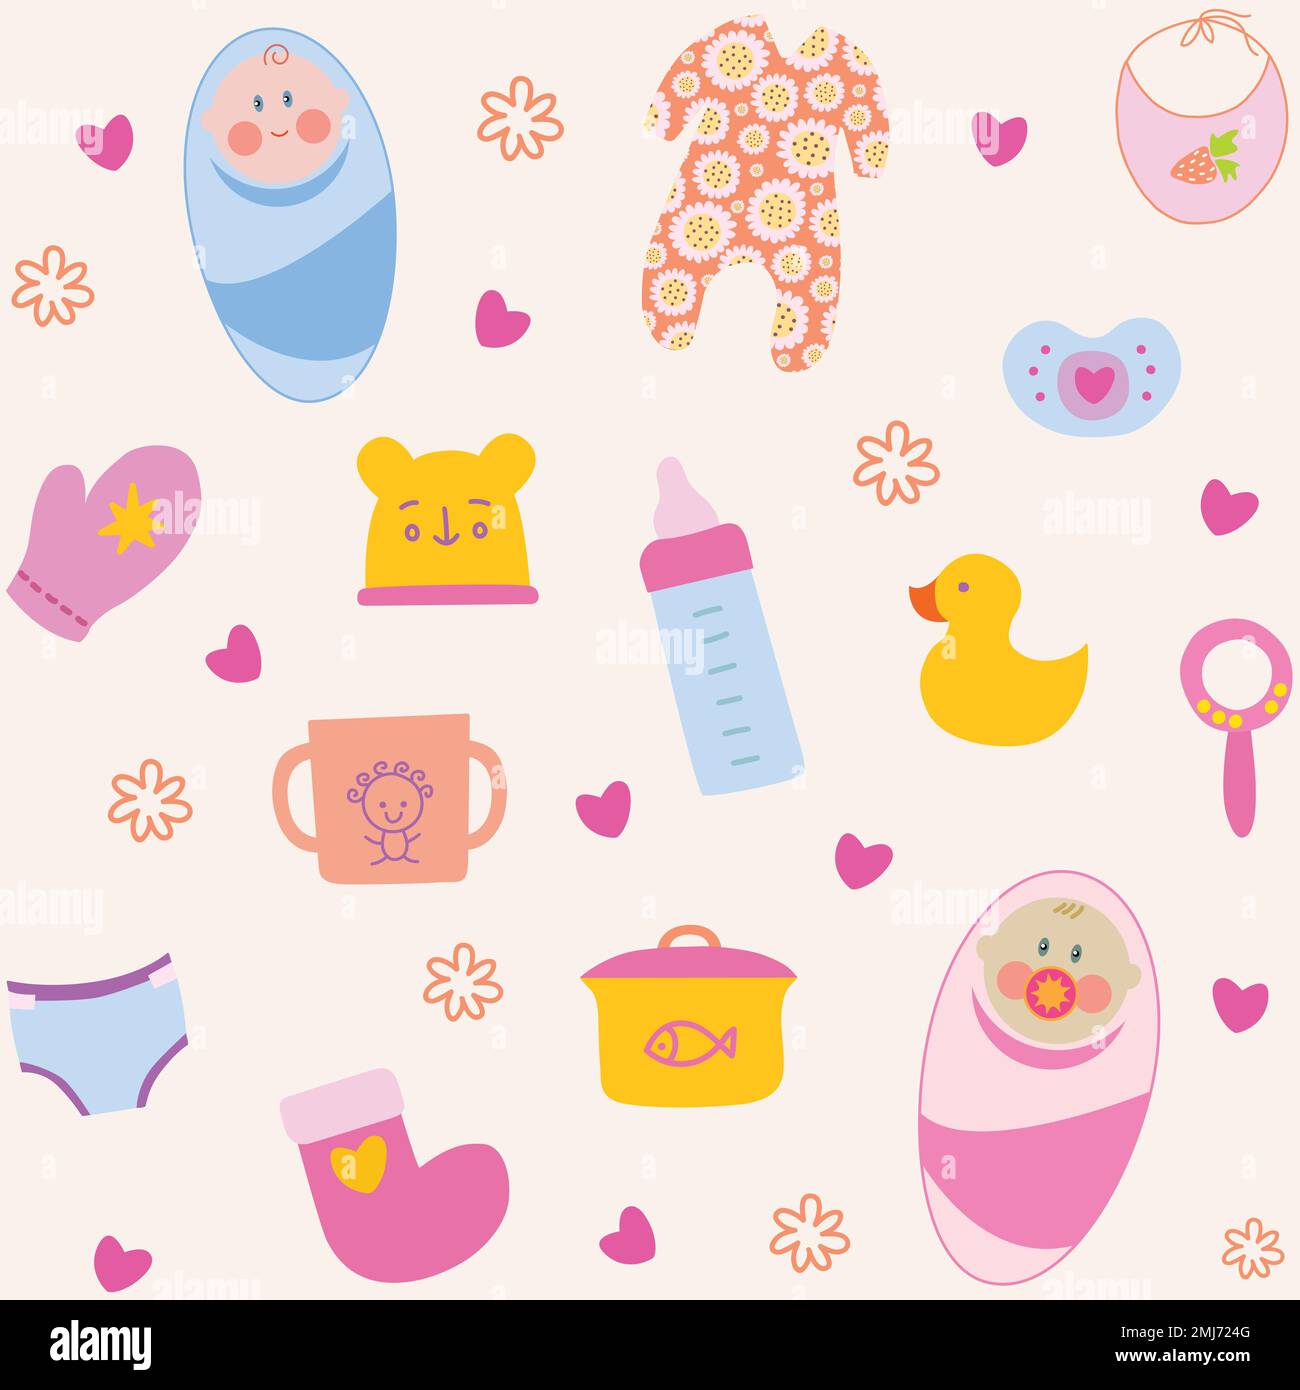 https://c8.alamy.com/comp/2MJ724G/colourful-baby-items-seamless-pattern-on-beige-background-2MJ724G.jpg